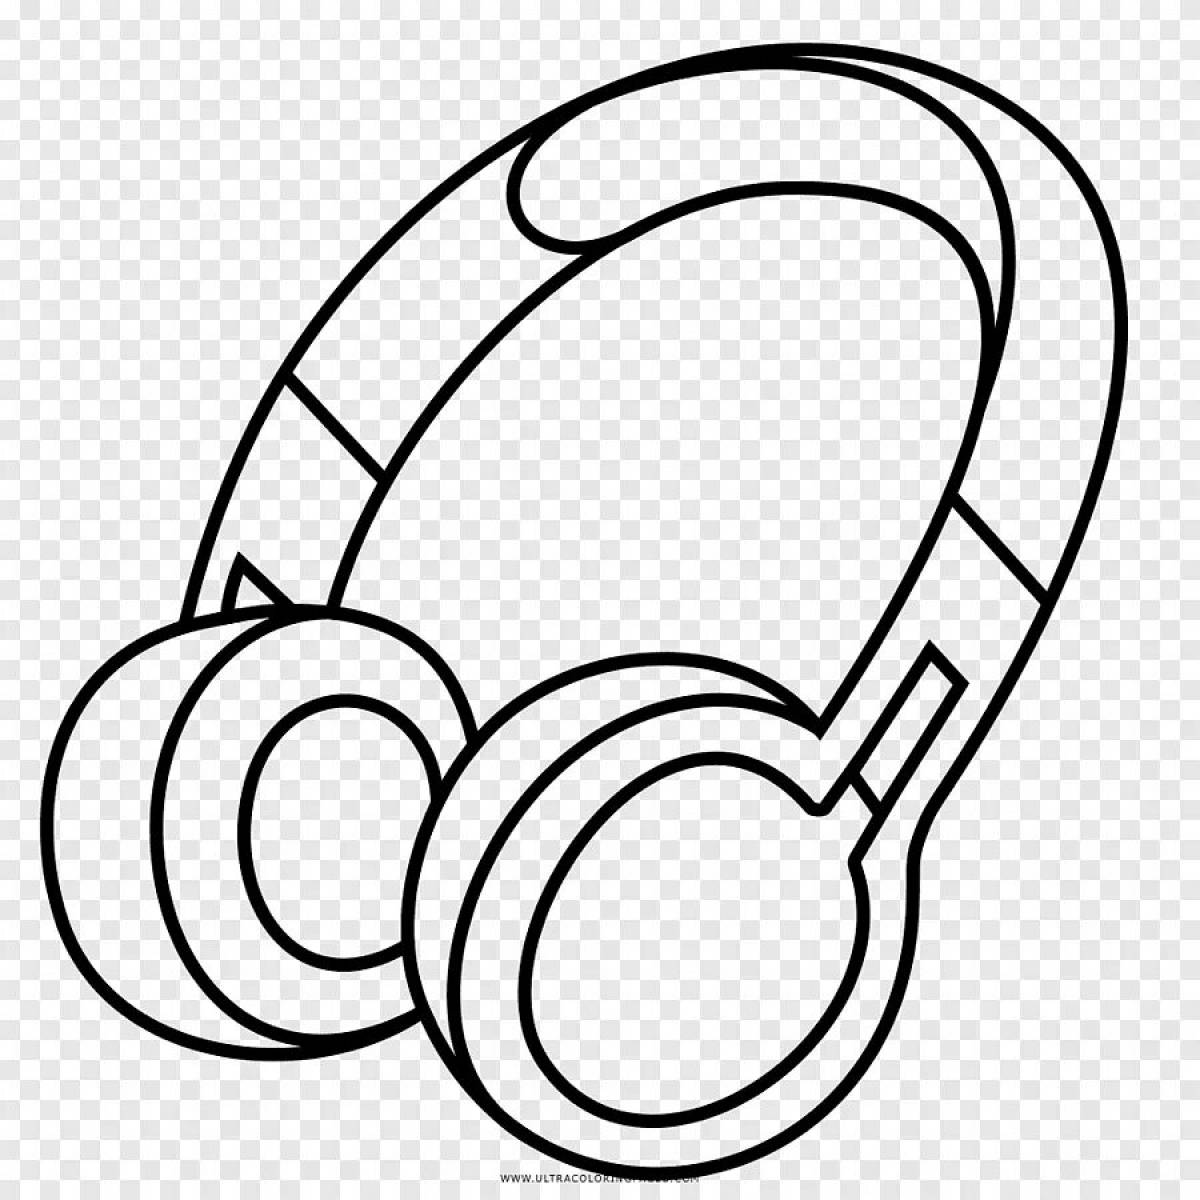 Fun headphone coloring pages for preschoolers